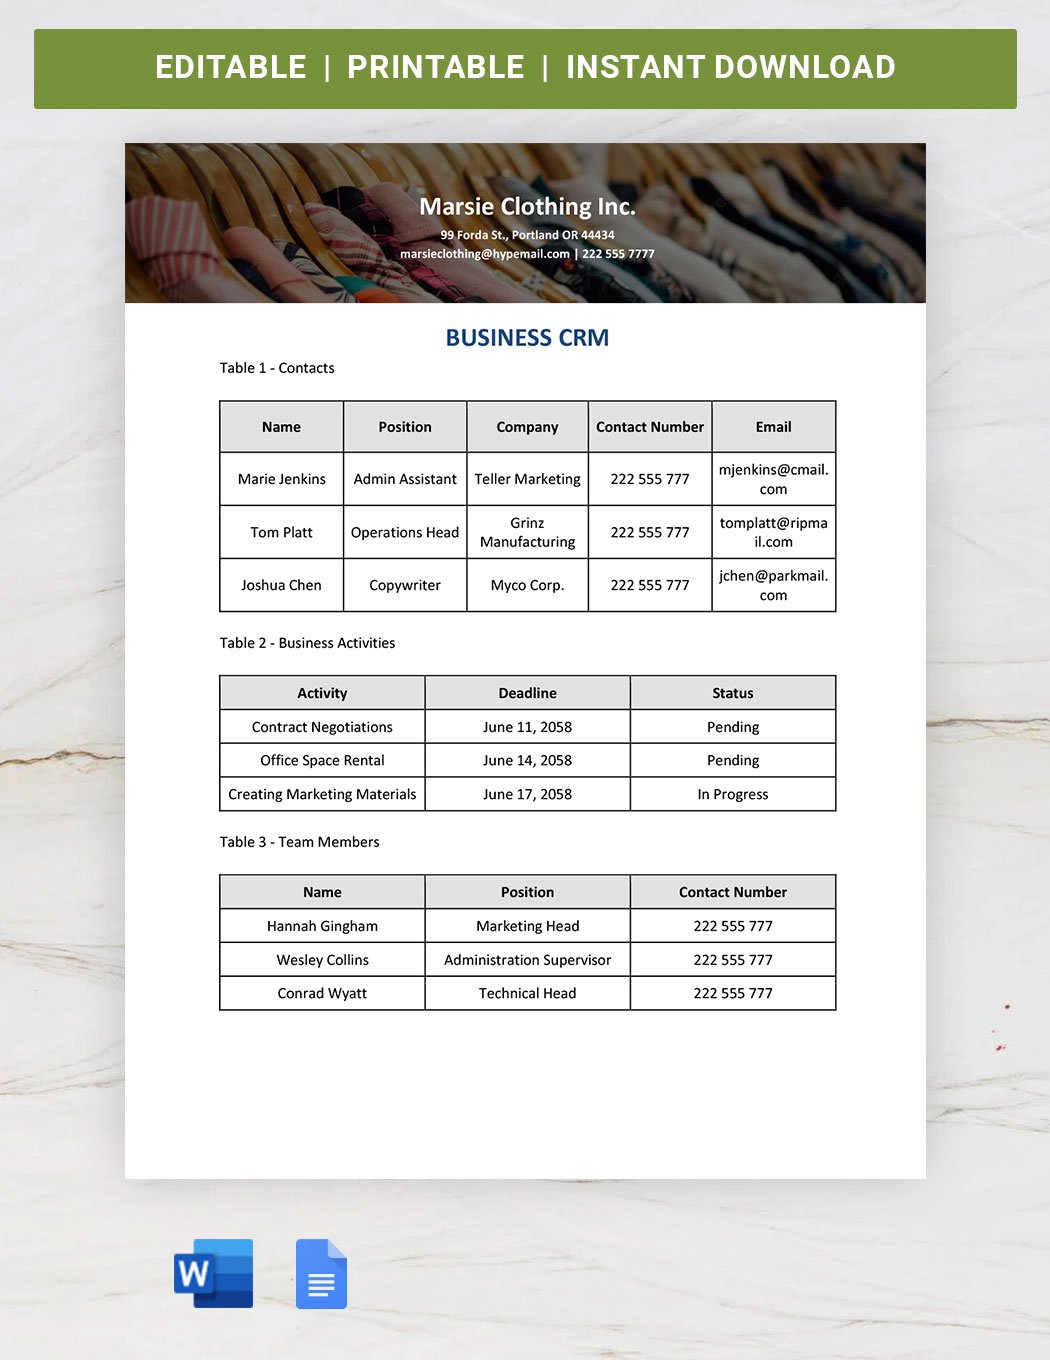 Business CRM Template in Word, Google Docs